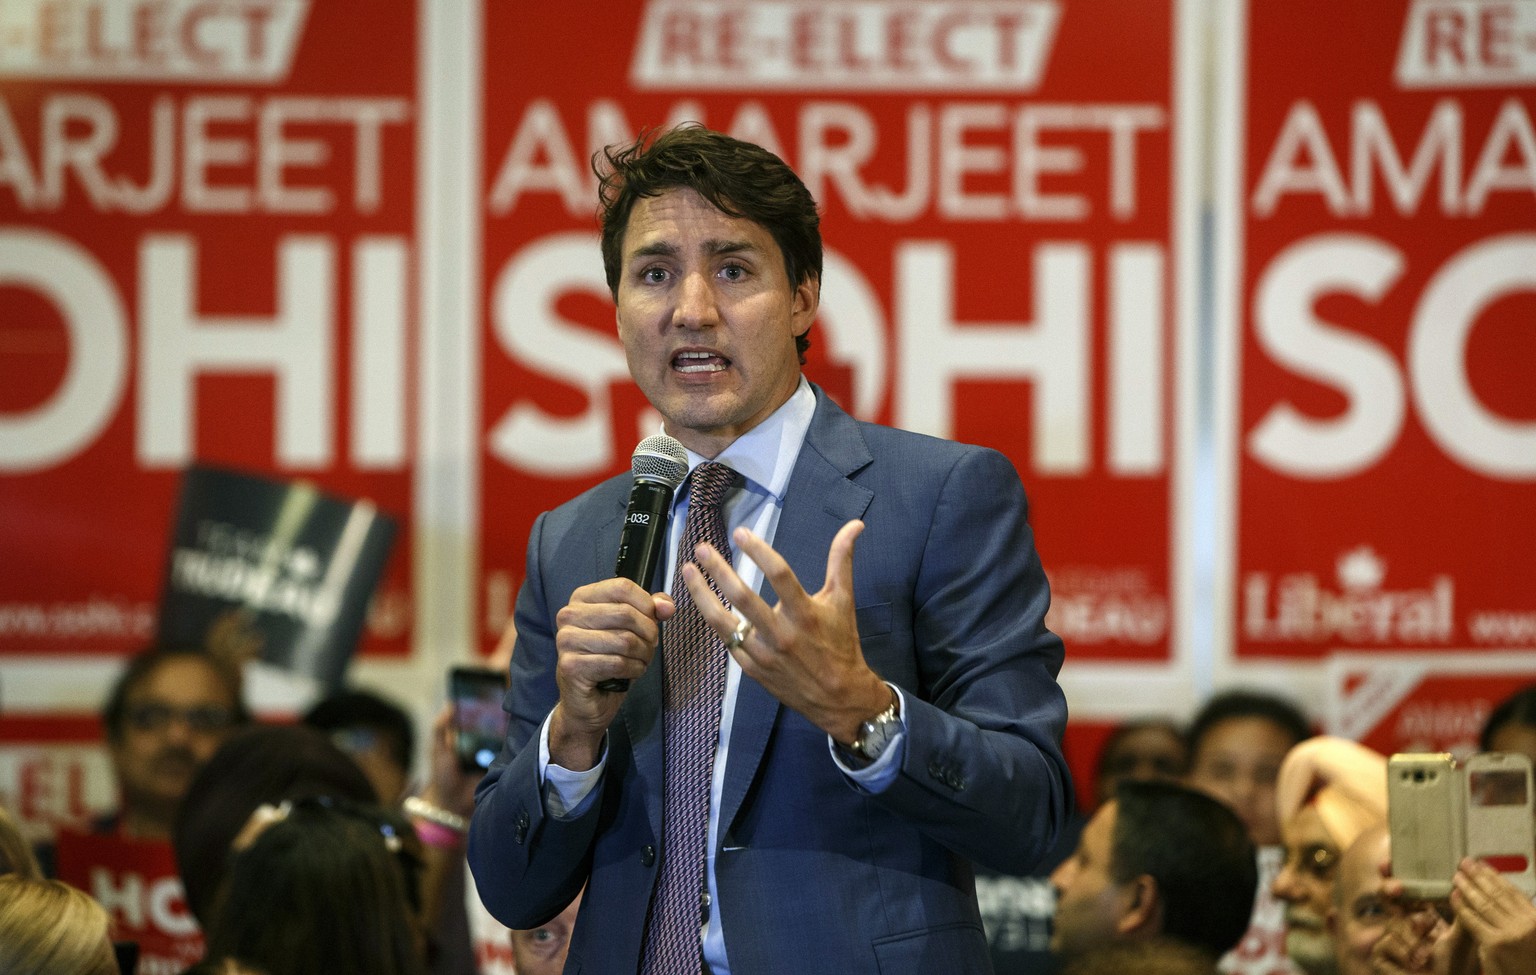 Canada&#039;s Prime Minister Justin Trudeau speaks during a Team Trudeau 2019 campaign event in Edmonton, Alberta, Canada, on Thursday, July 11, 2019. (Jason Franson/The Canadian Press via AP)